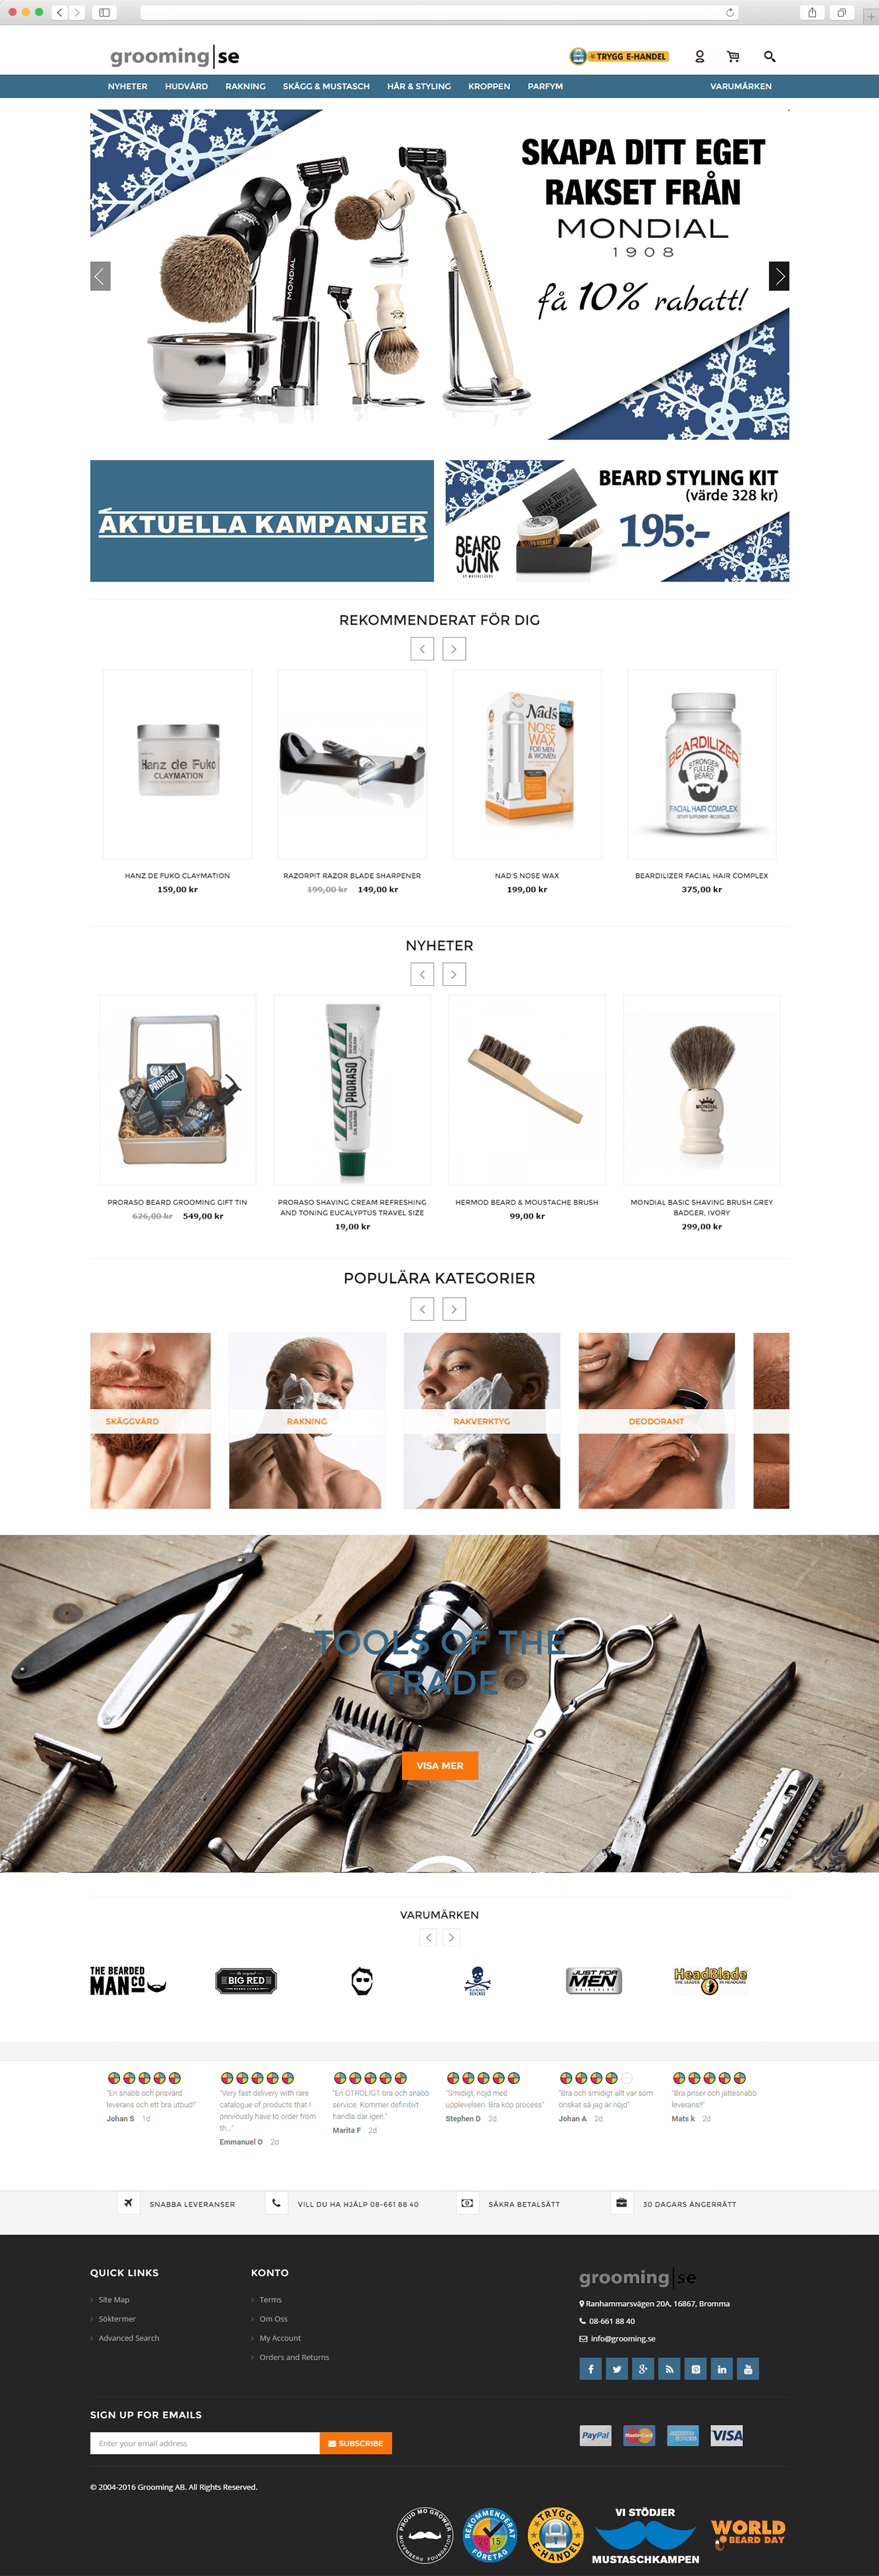 Our Works: Grooming.se